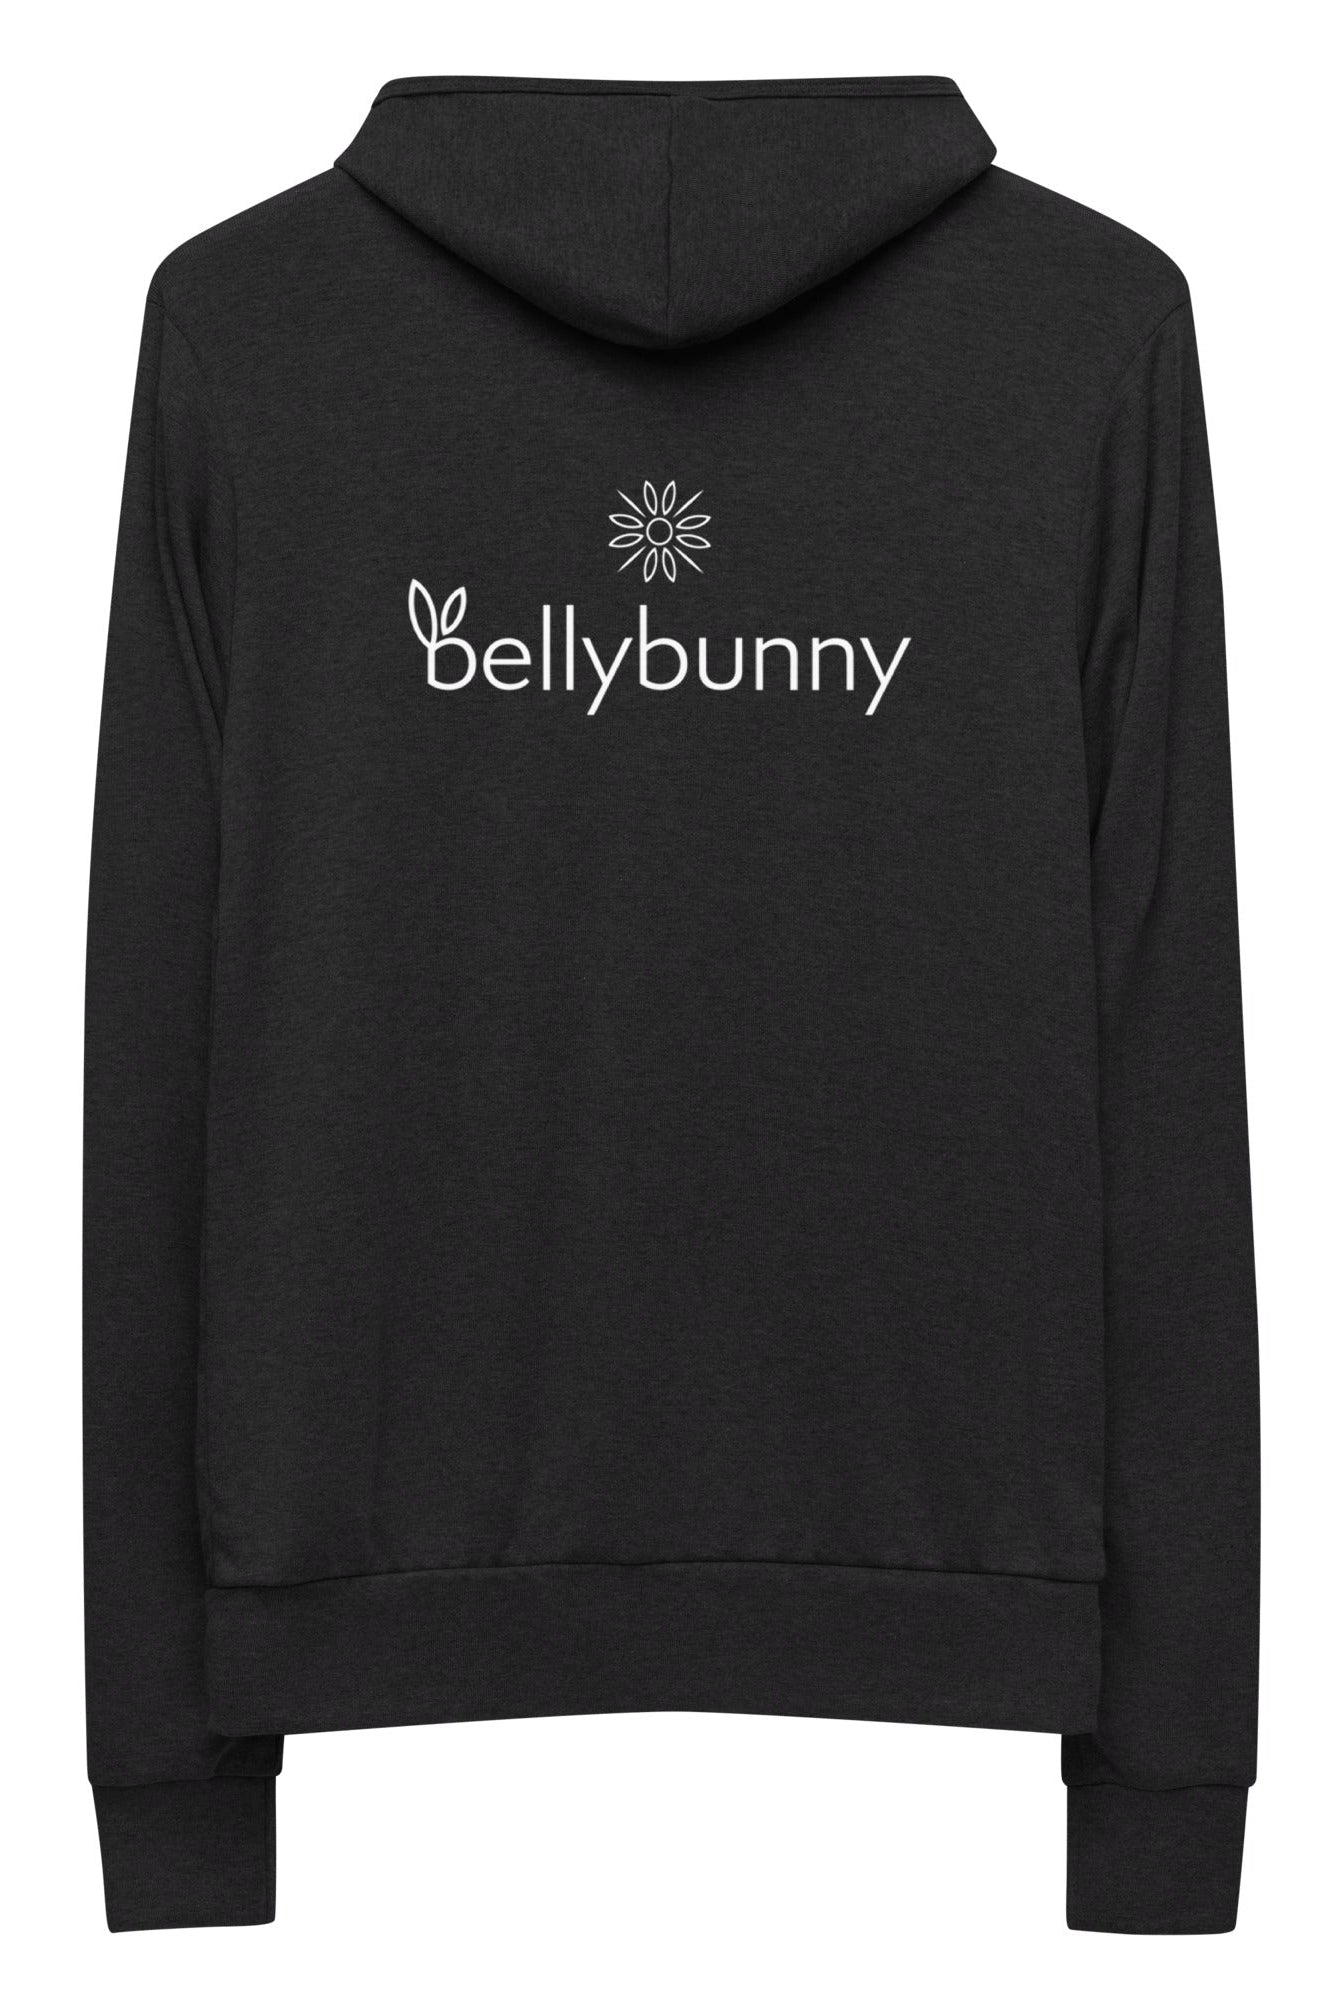 Bellybunny Women's Zip-Up Hoodie-Charcoal black Triblend with white logo